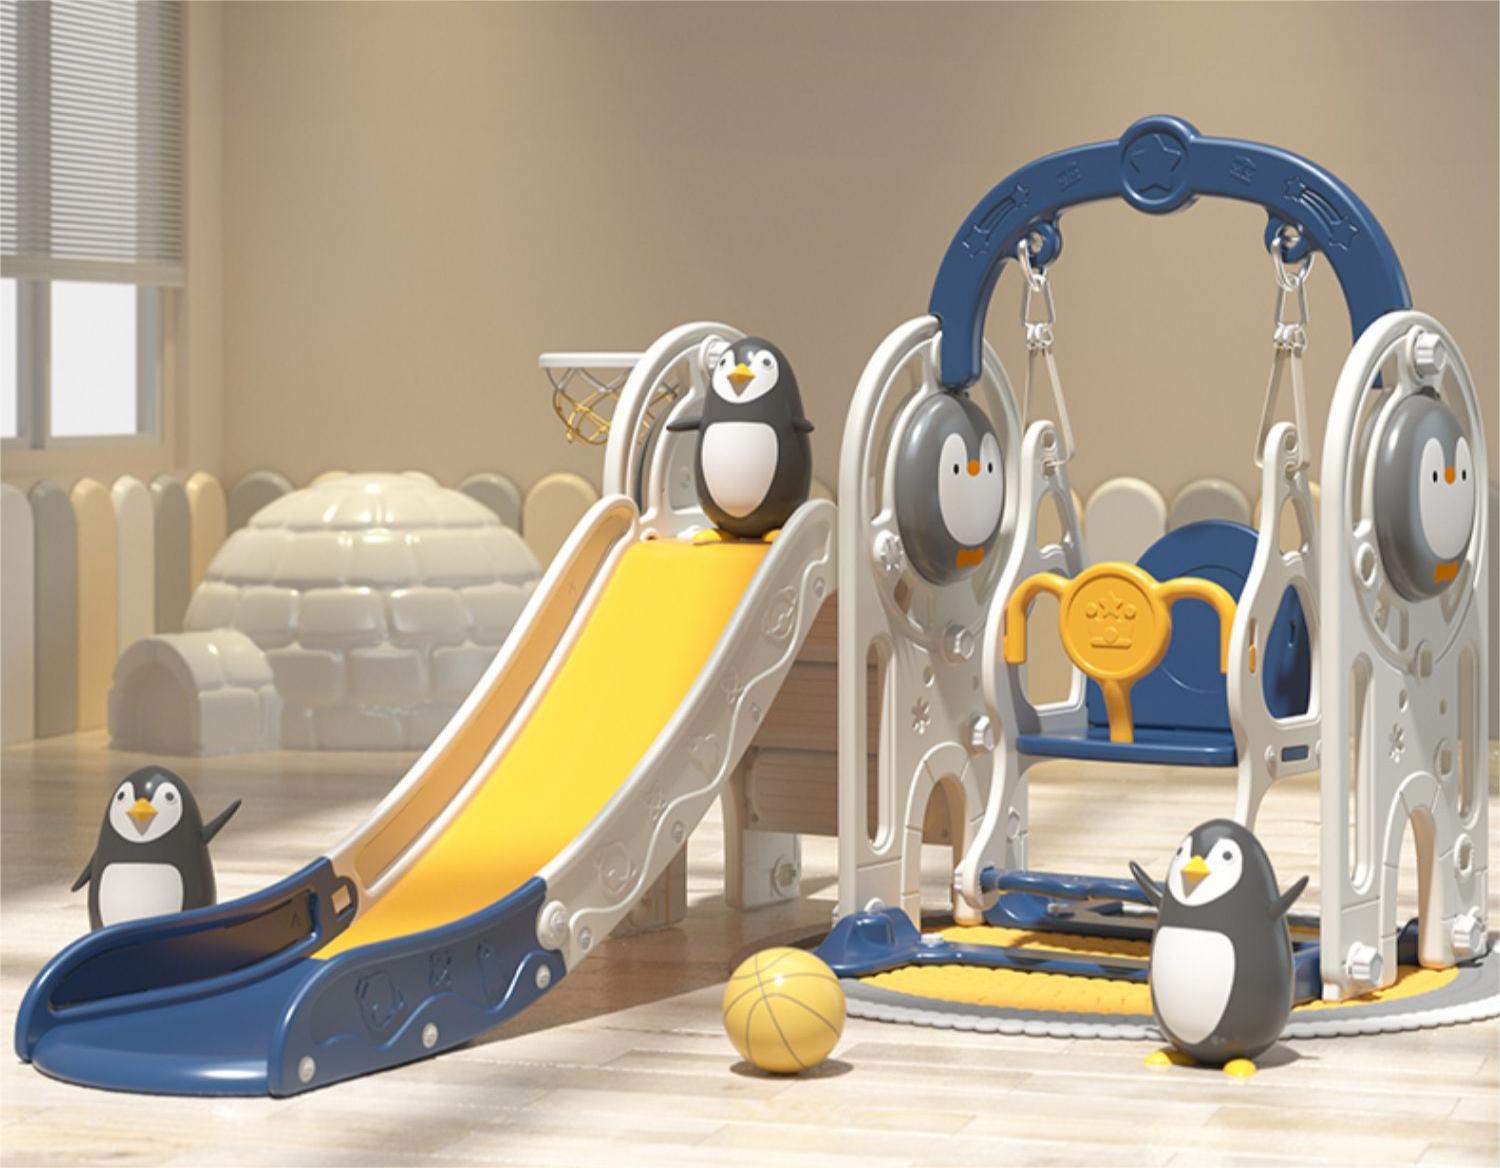 Guidelines for the safe use of children's slides and swings: a must-read for parents! !